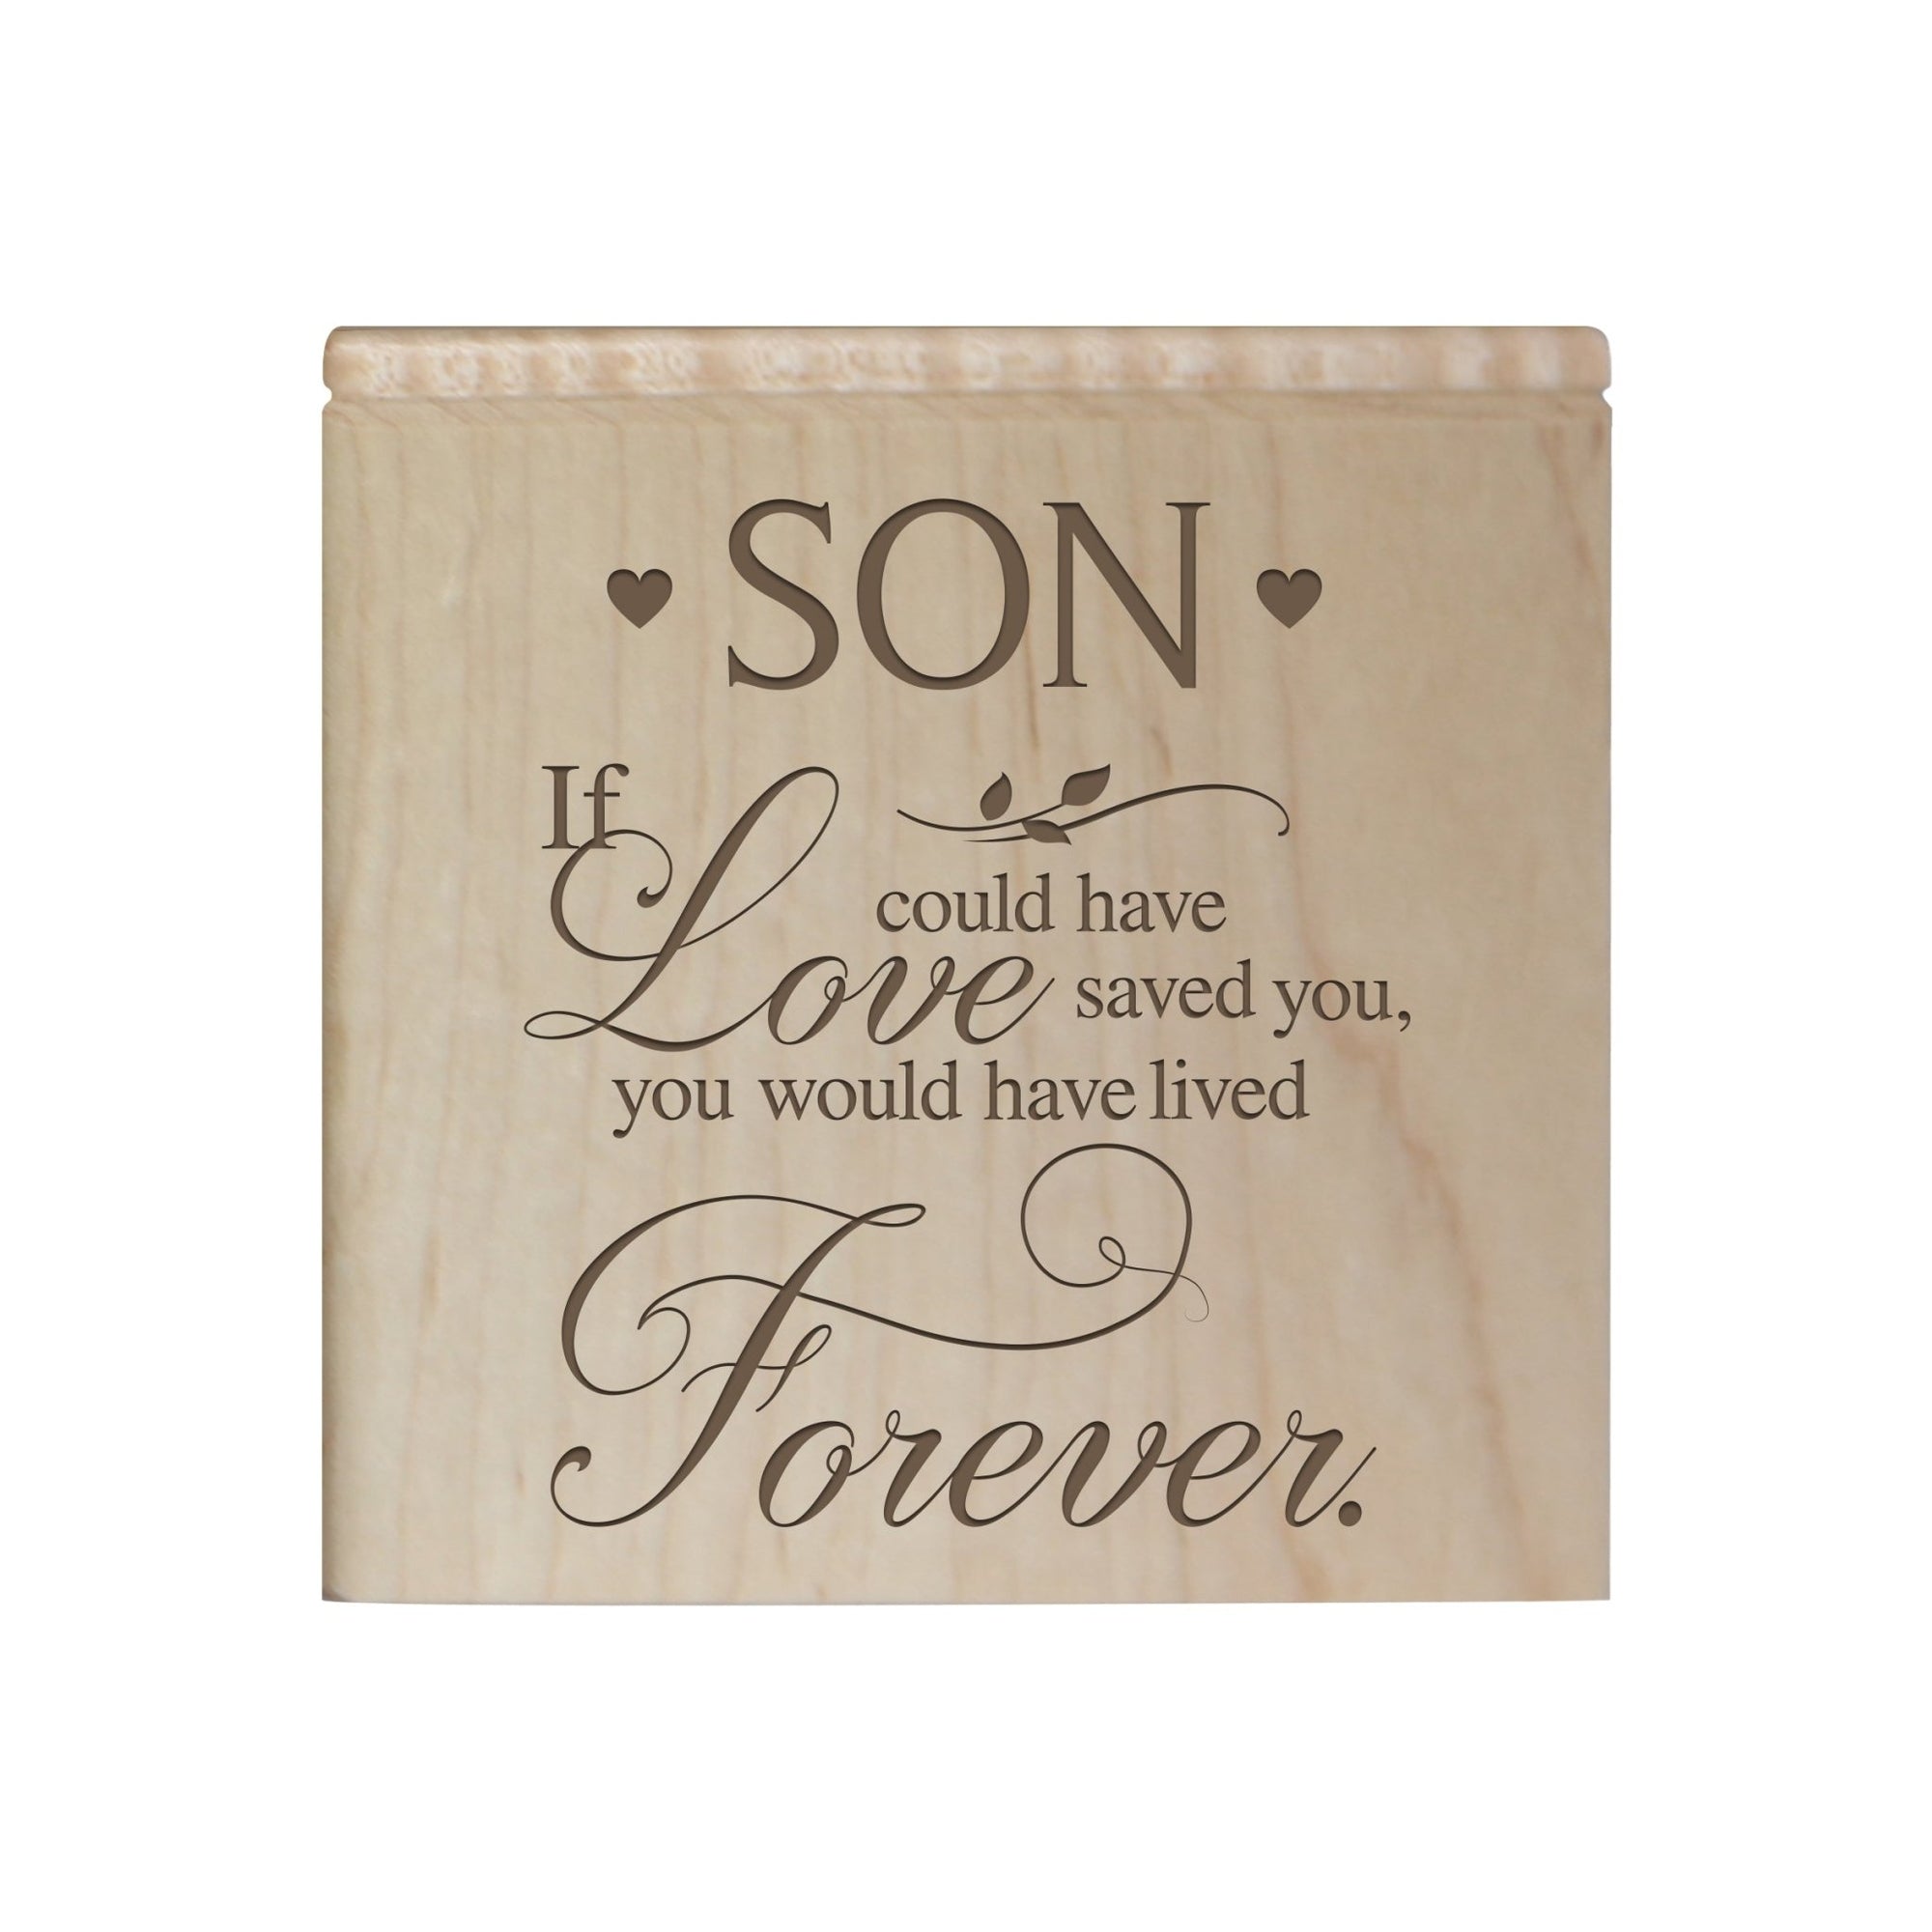 Modern Inspirational Memorial Wooden Cremation Urn Box 4.5x4.5in Holds 49 Cu Inches Of Human Ashes (If love could have saved Son) Funeral and Commemorative Keepsake - LifeSong Milestones